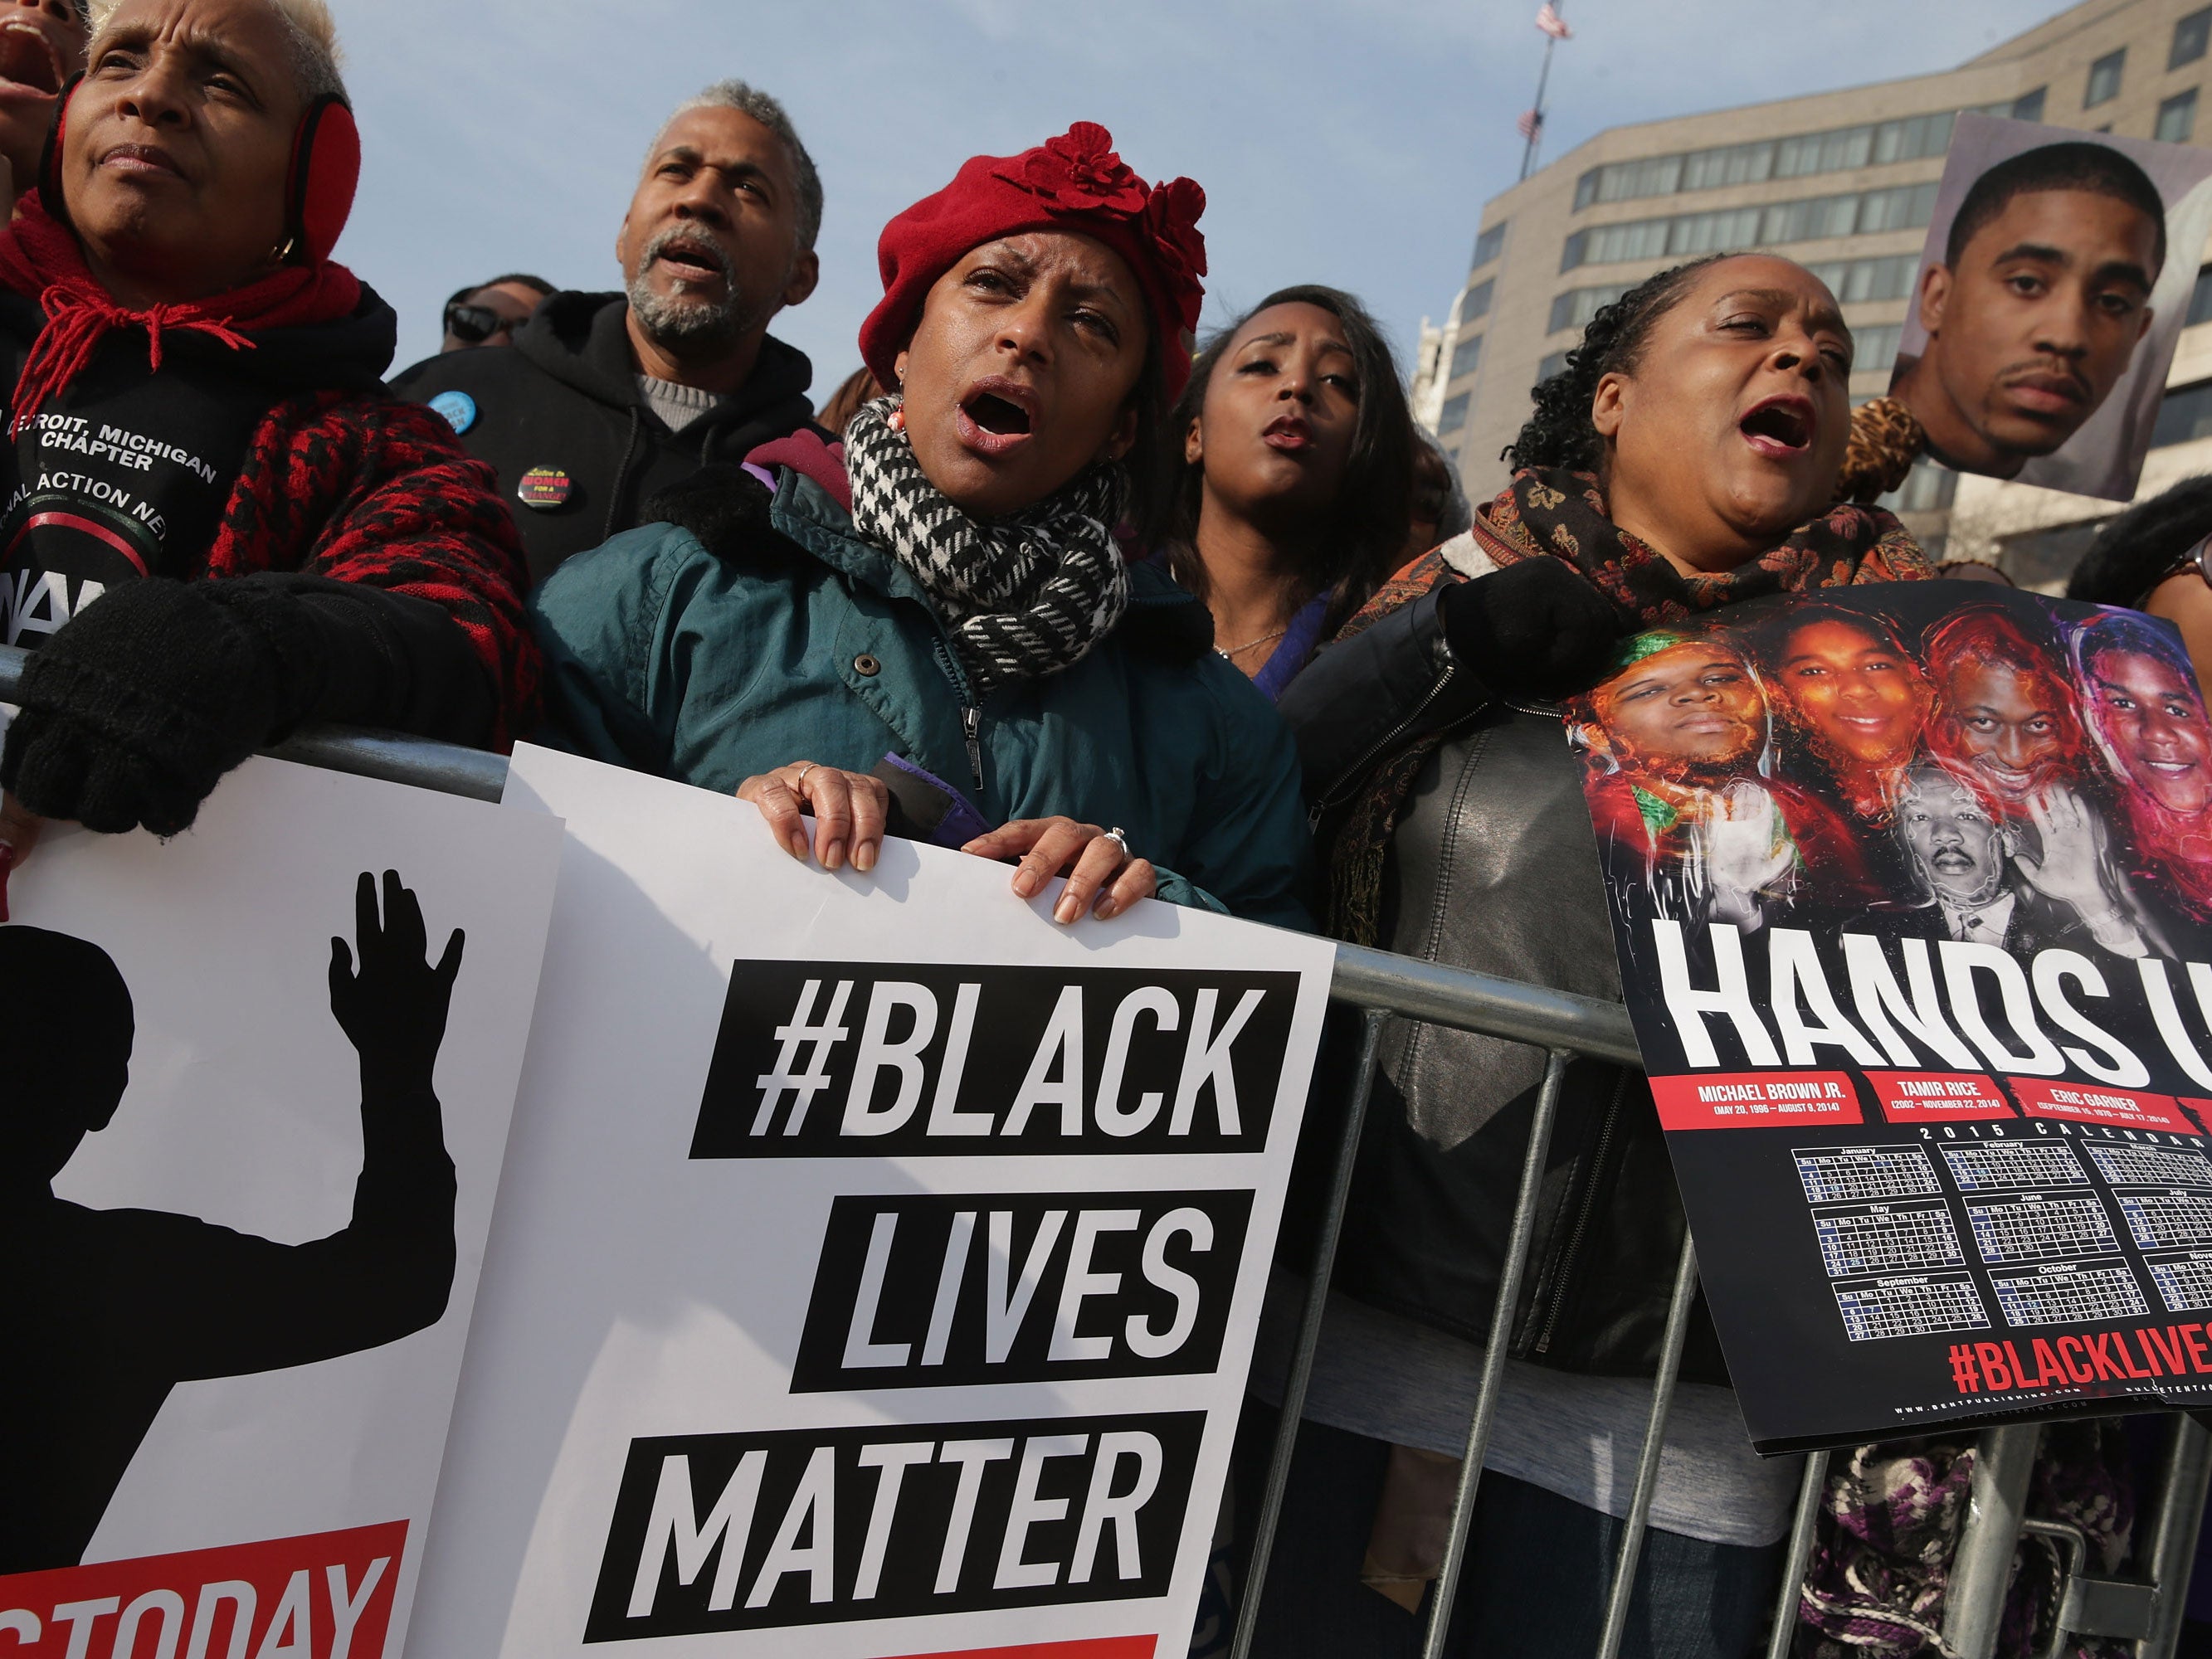 Thousands of people gathered in Washington, DC for the 'Justice For All' rally and march against police brutality and the killing of unarmed black men by police